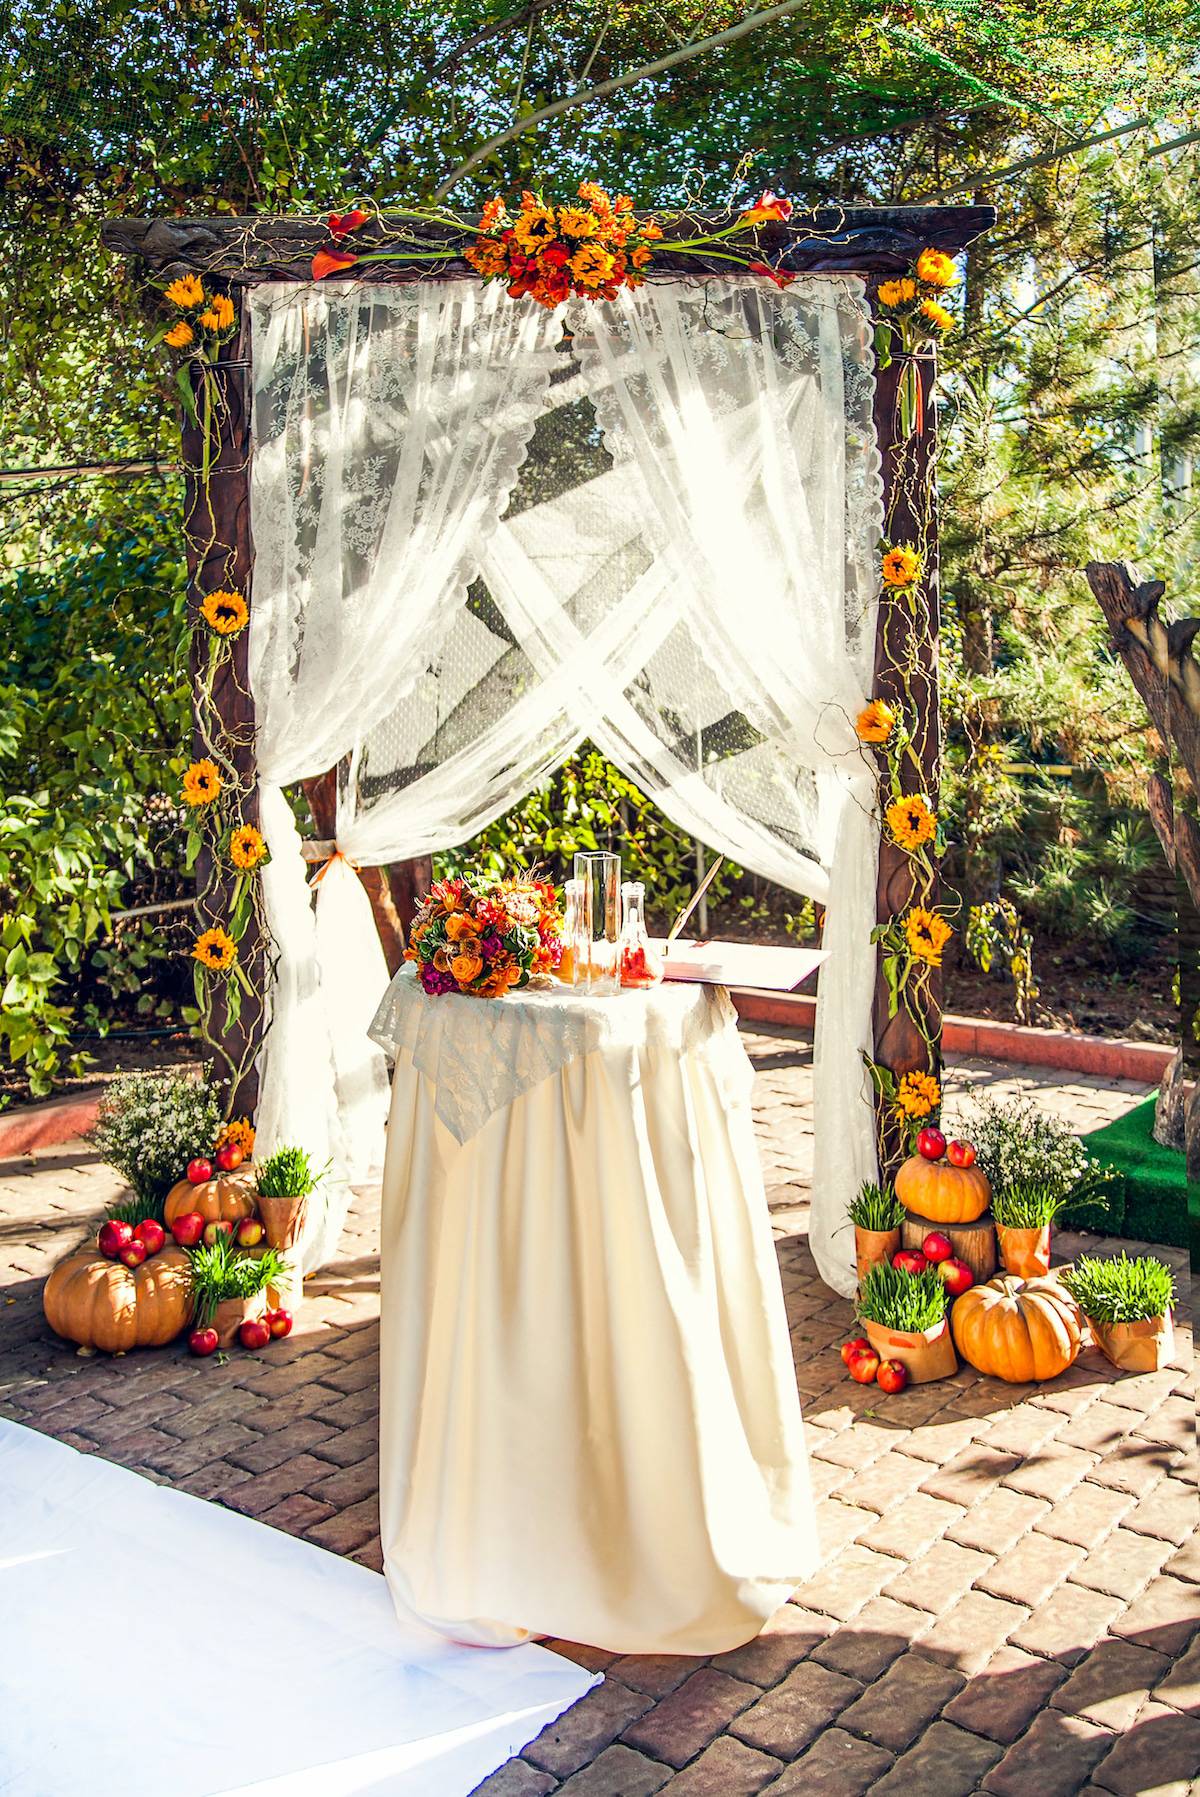 Autumn decorations for the wedding ceremony. Wedding arch for off-site wedding ceremony, decorated in autumn theme.